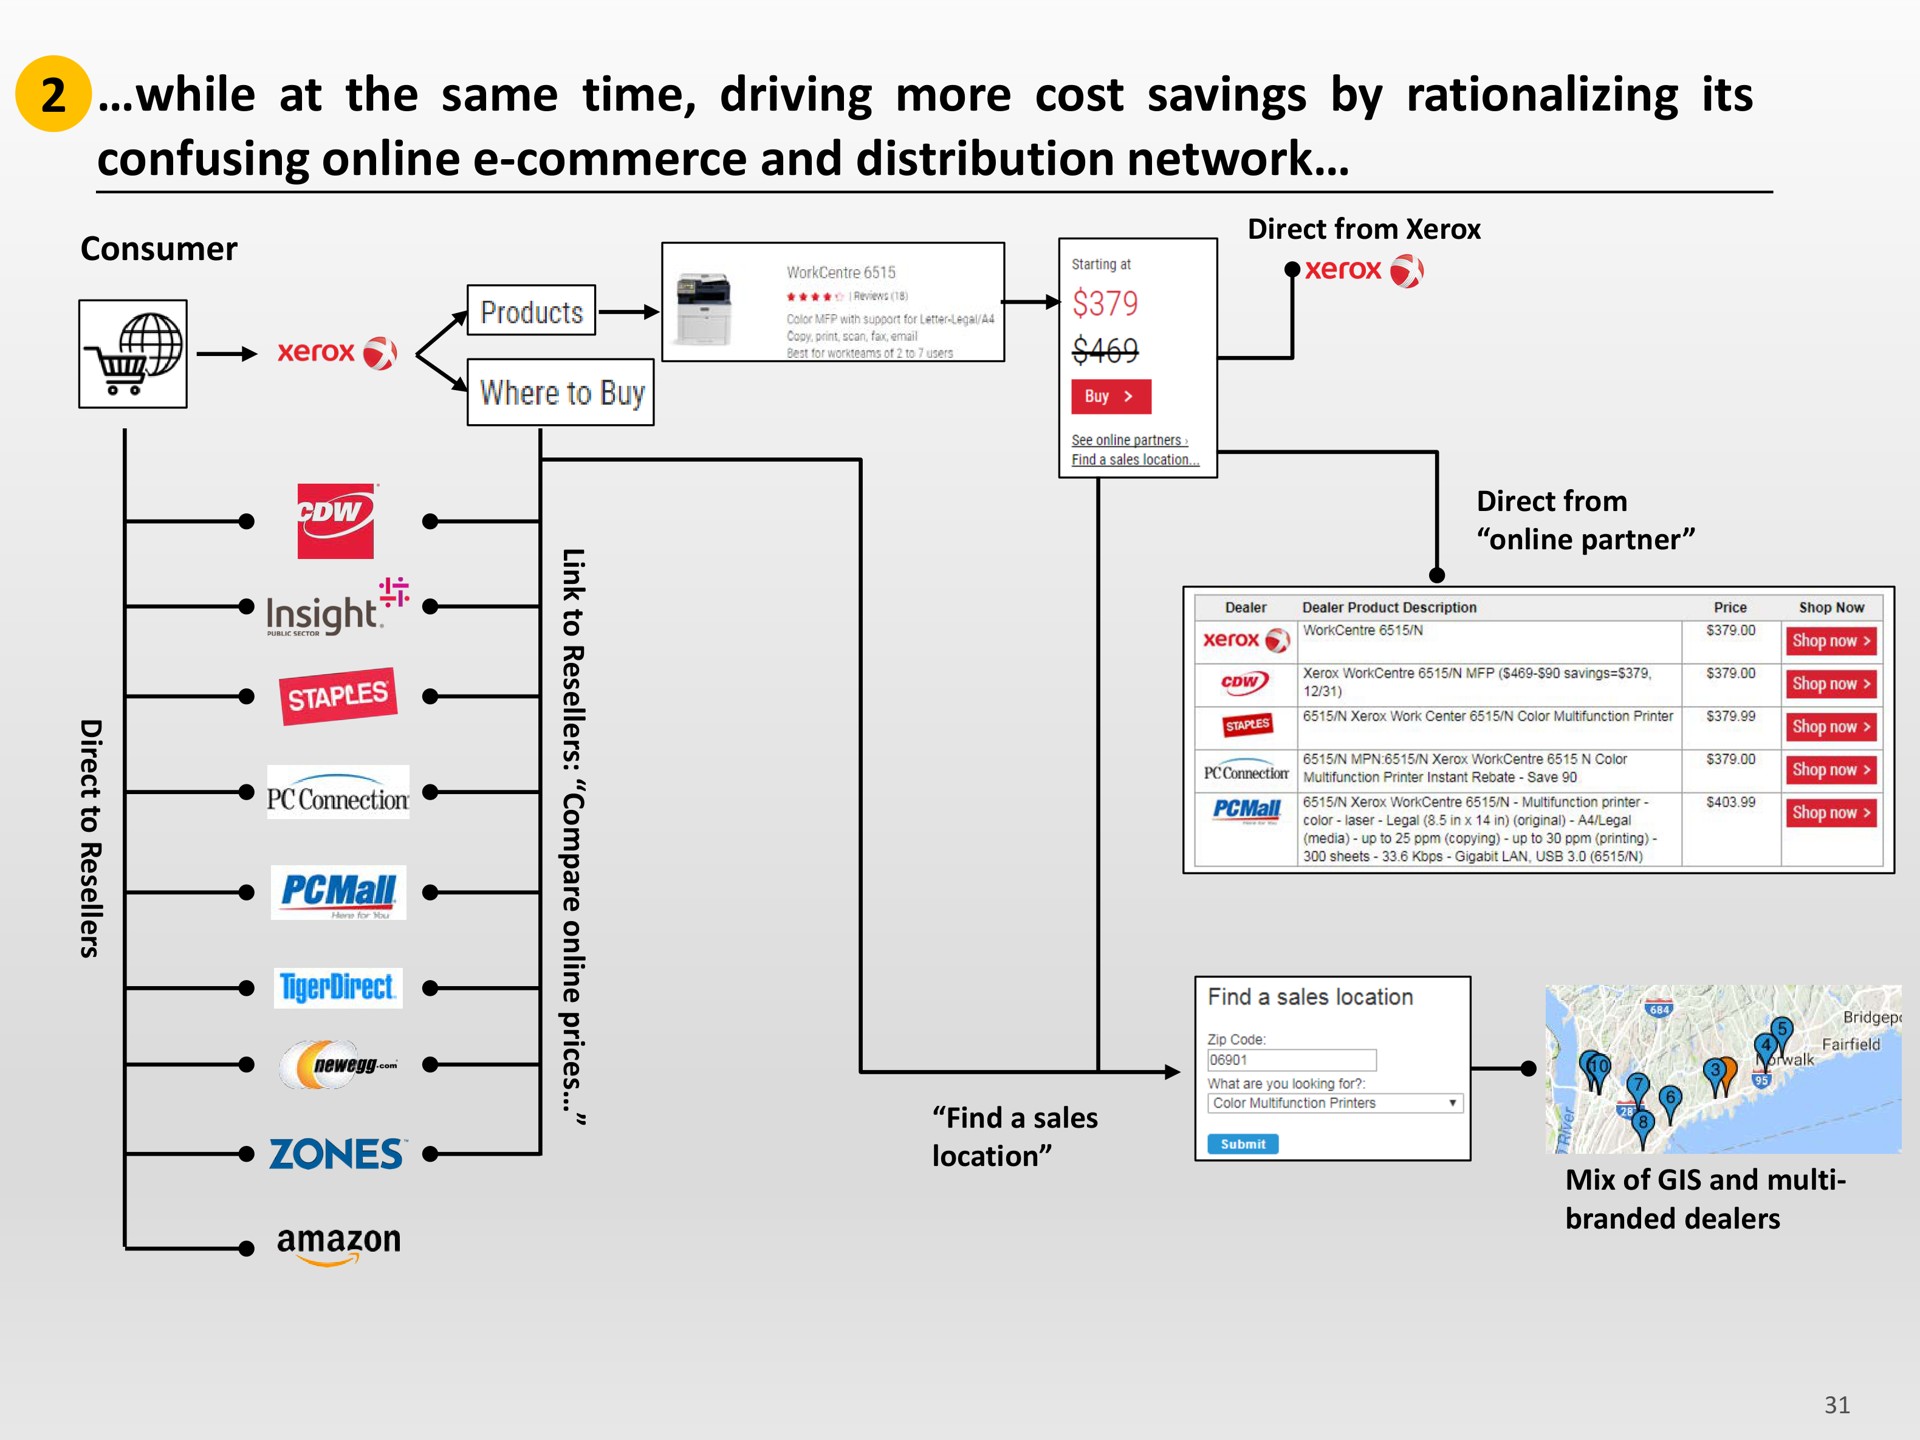 while at the same time driving more cost savings by rationalizing its confusing commerce and distribution network | Icahn Enterprises